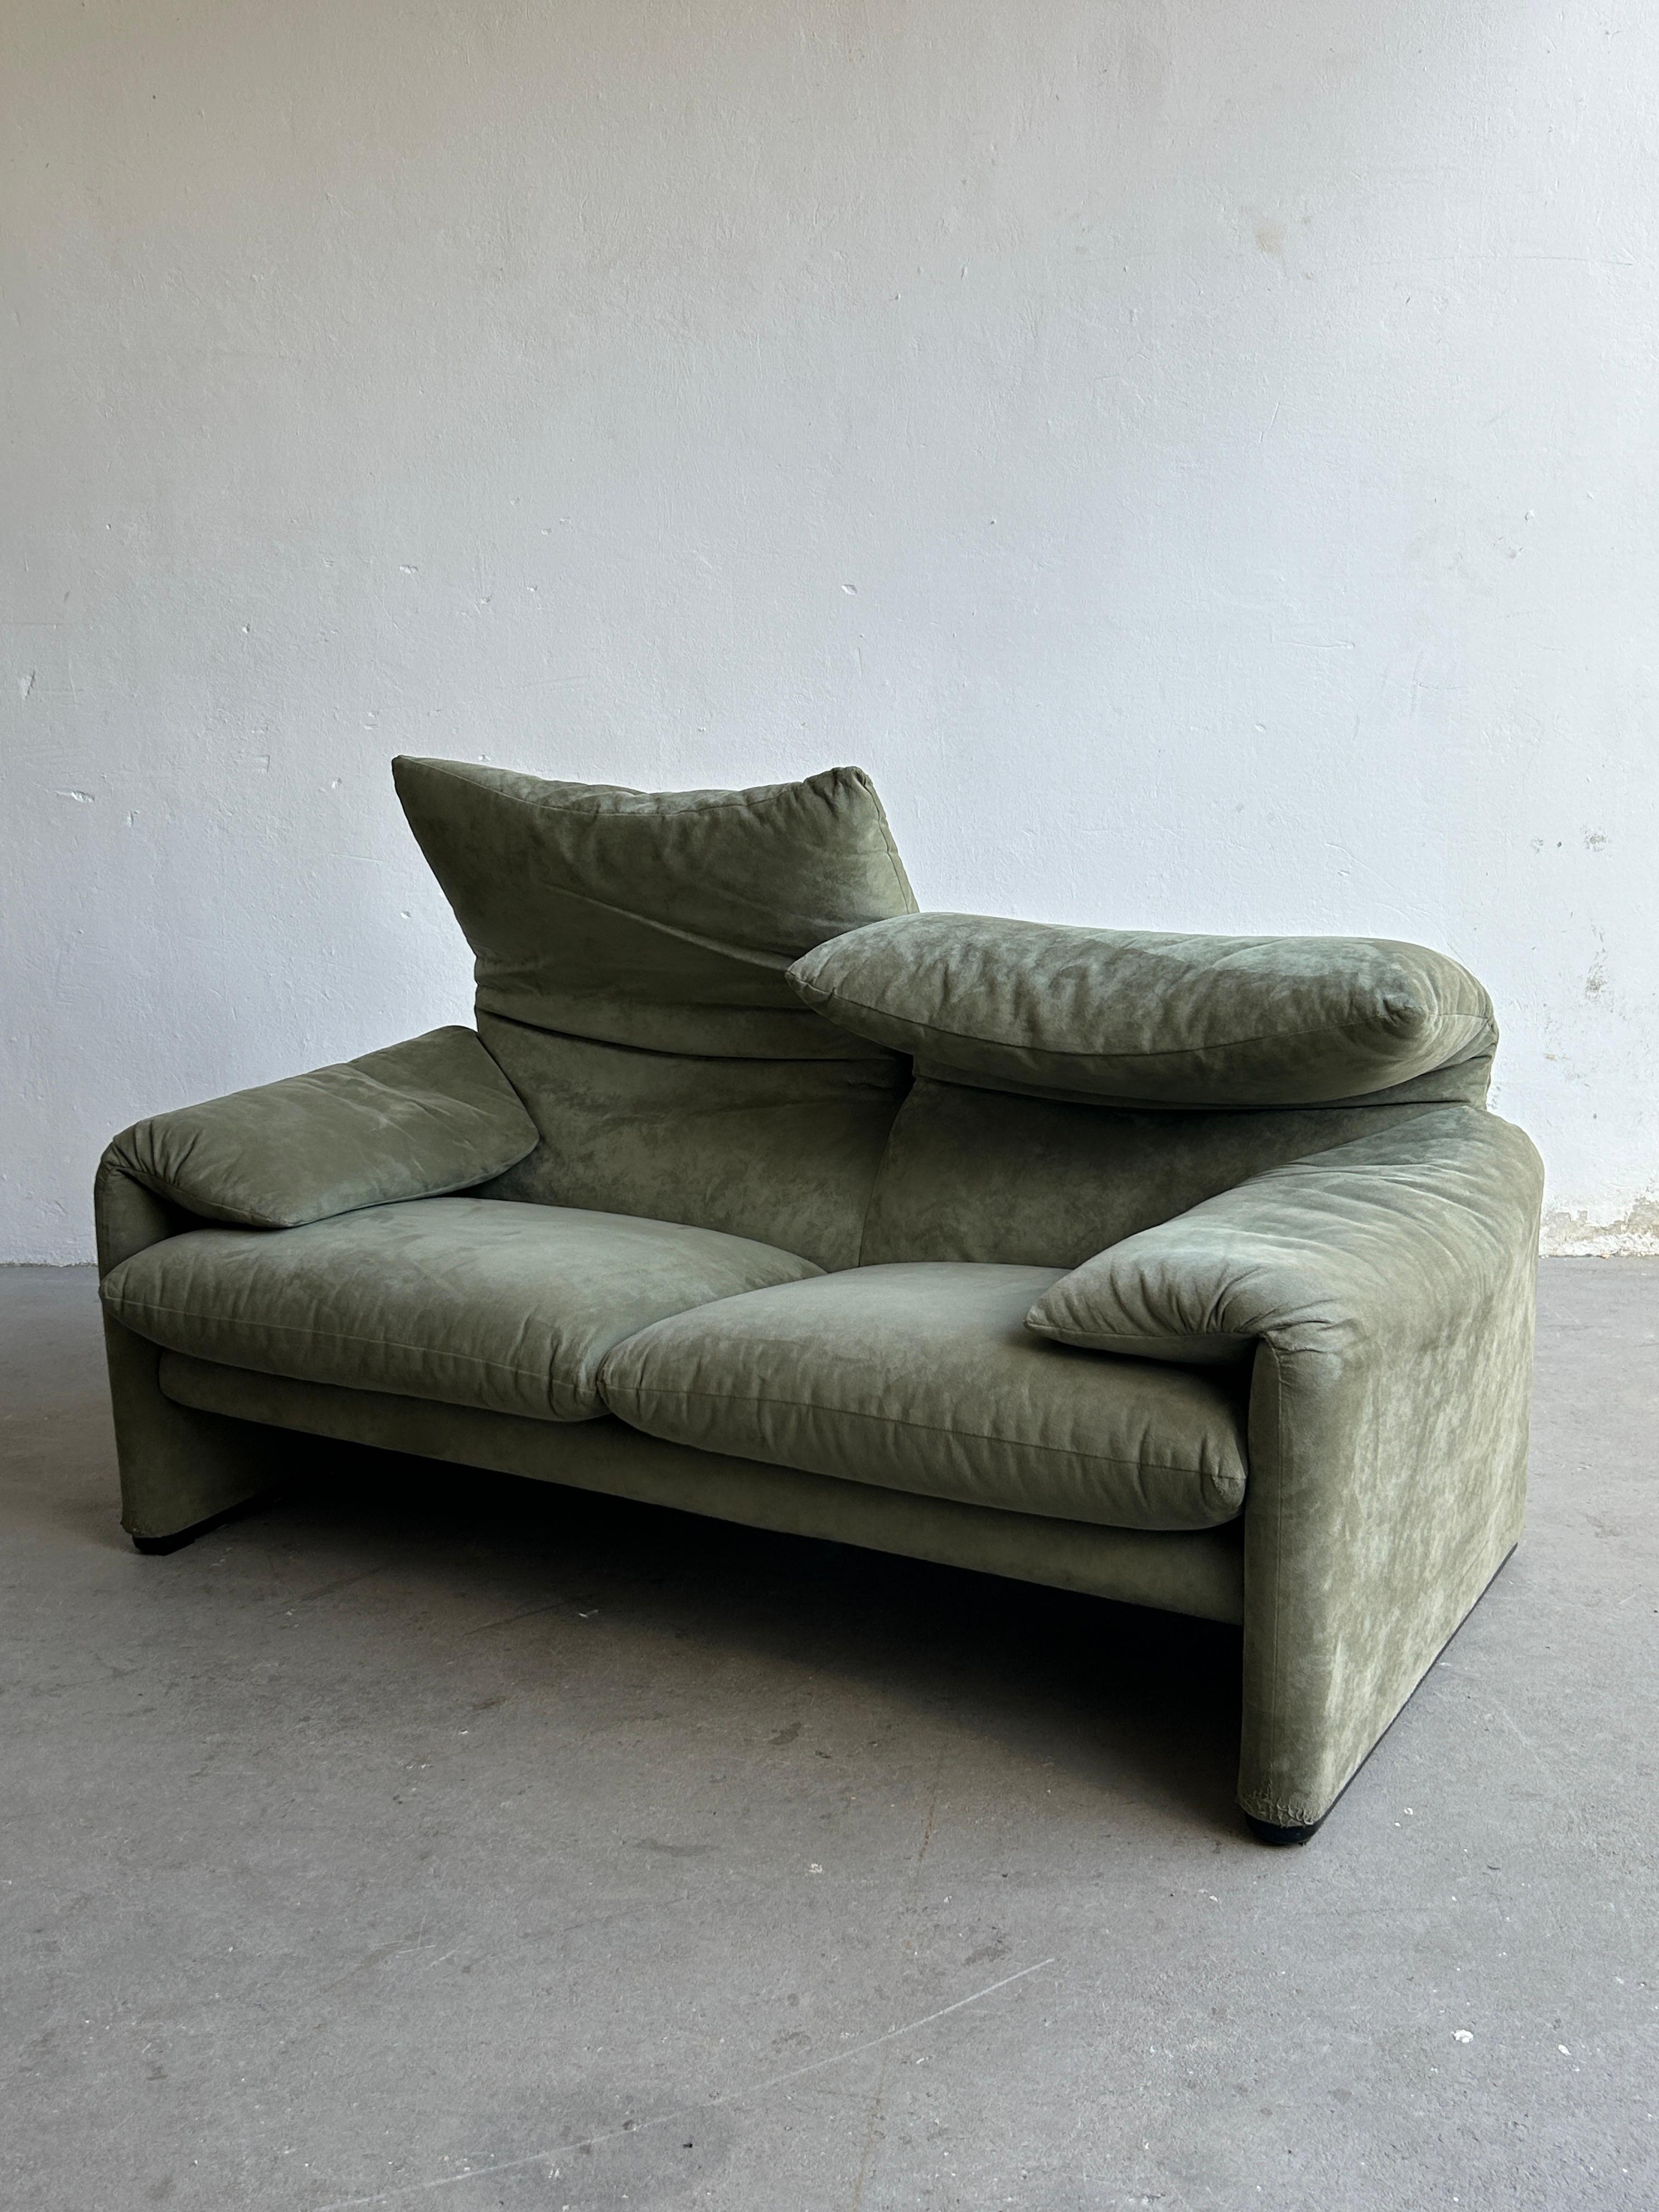 Vintage 'Maralunga' Two-Seater Sofa by Vico Magistretti for Cassina 3